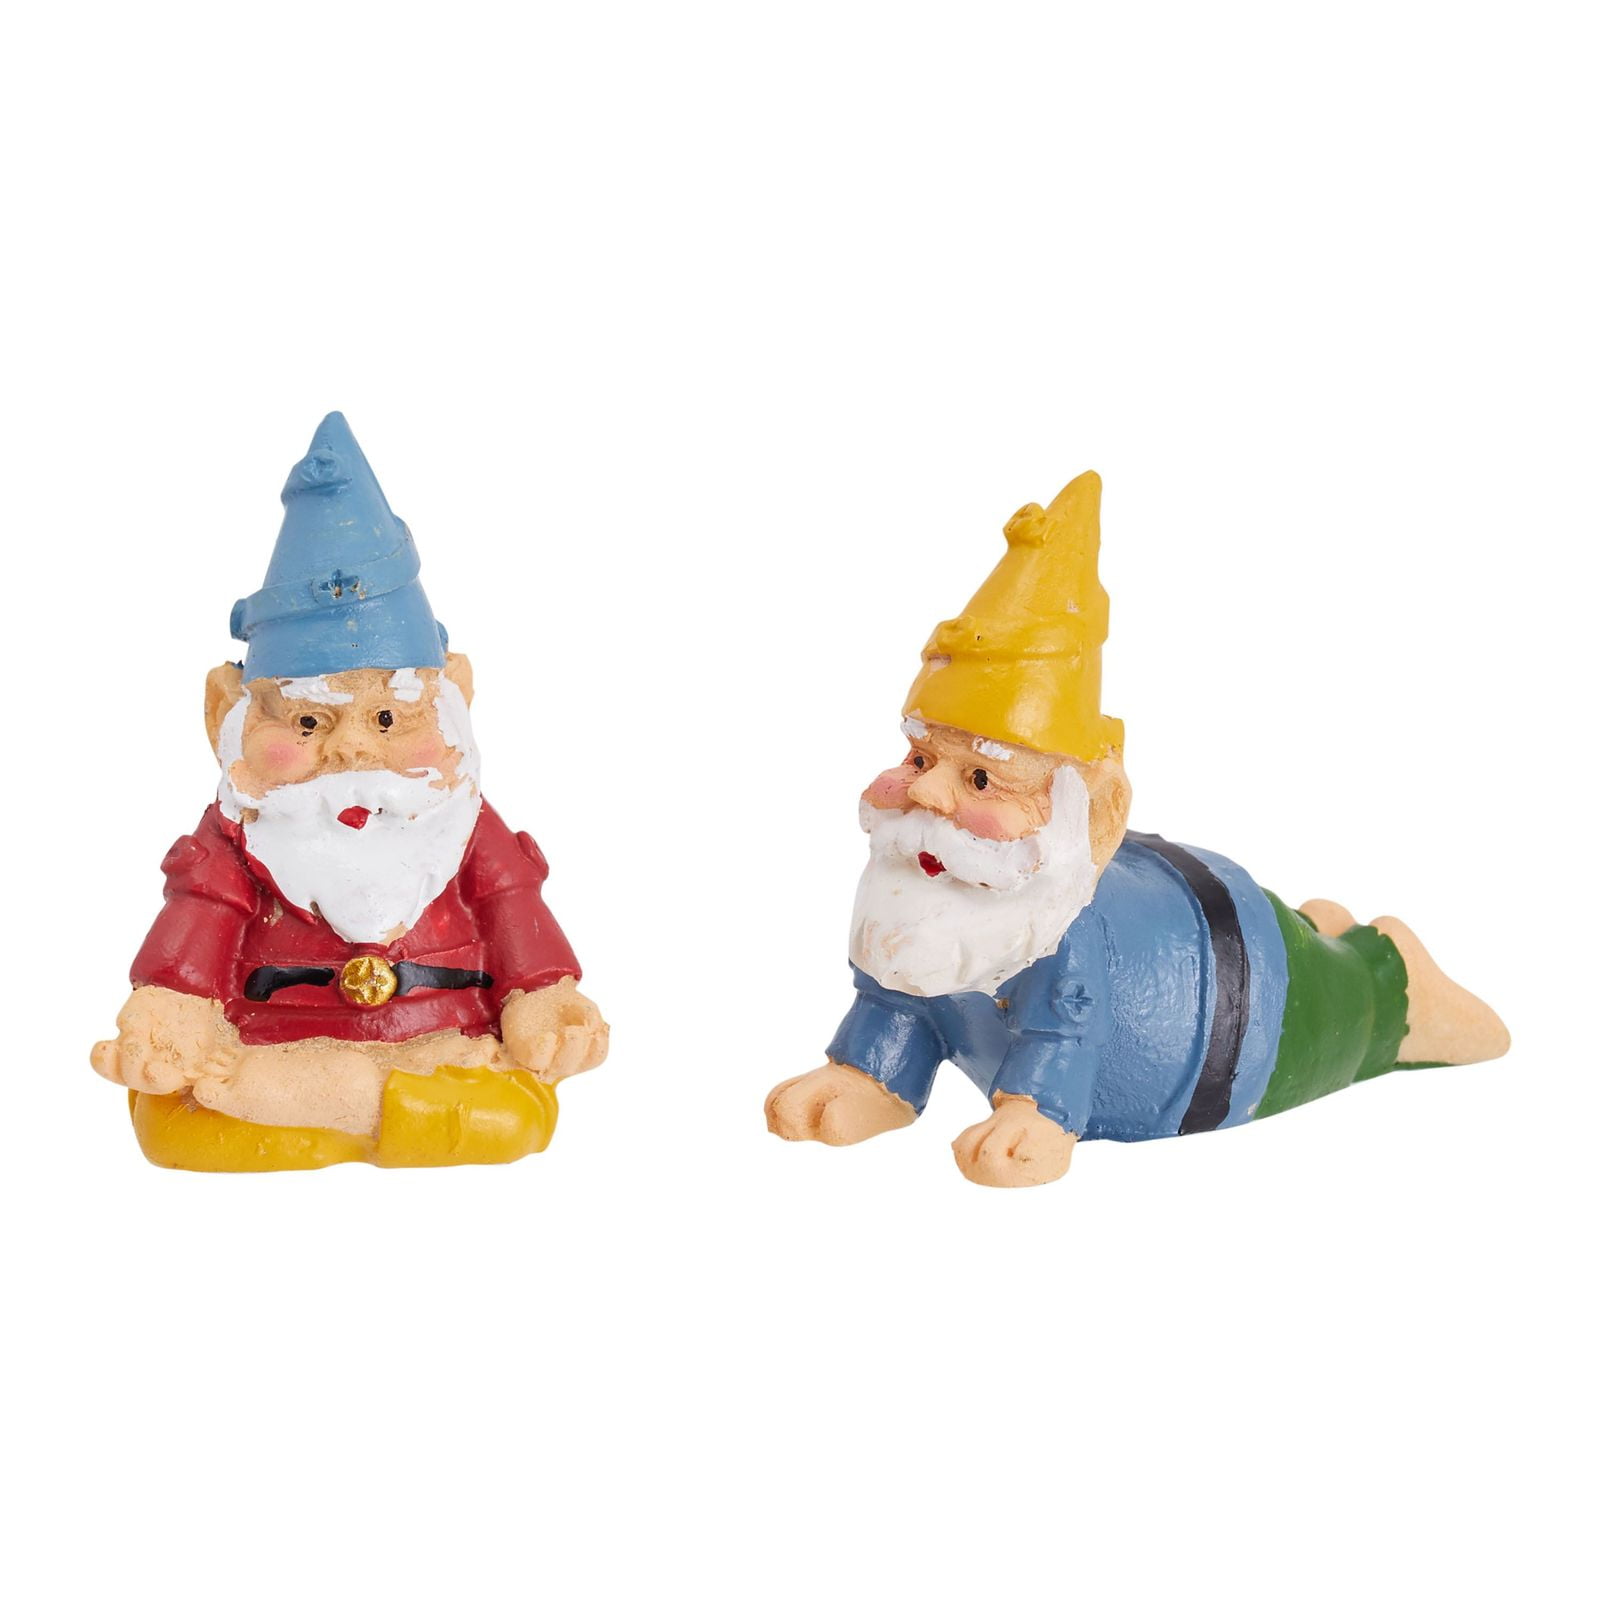 Tiny Gardening Knome Dwarf Figurine Statues Kit Small Fairy Garden Accessories of 4 PCS for Indoor Outdoor Yard Lawn Decor Mini Yoga Gnomes Garden Decorations Miniature Gnome Set Ornaments 